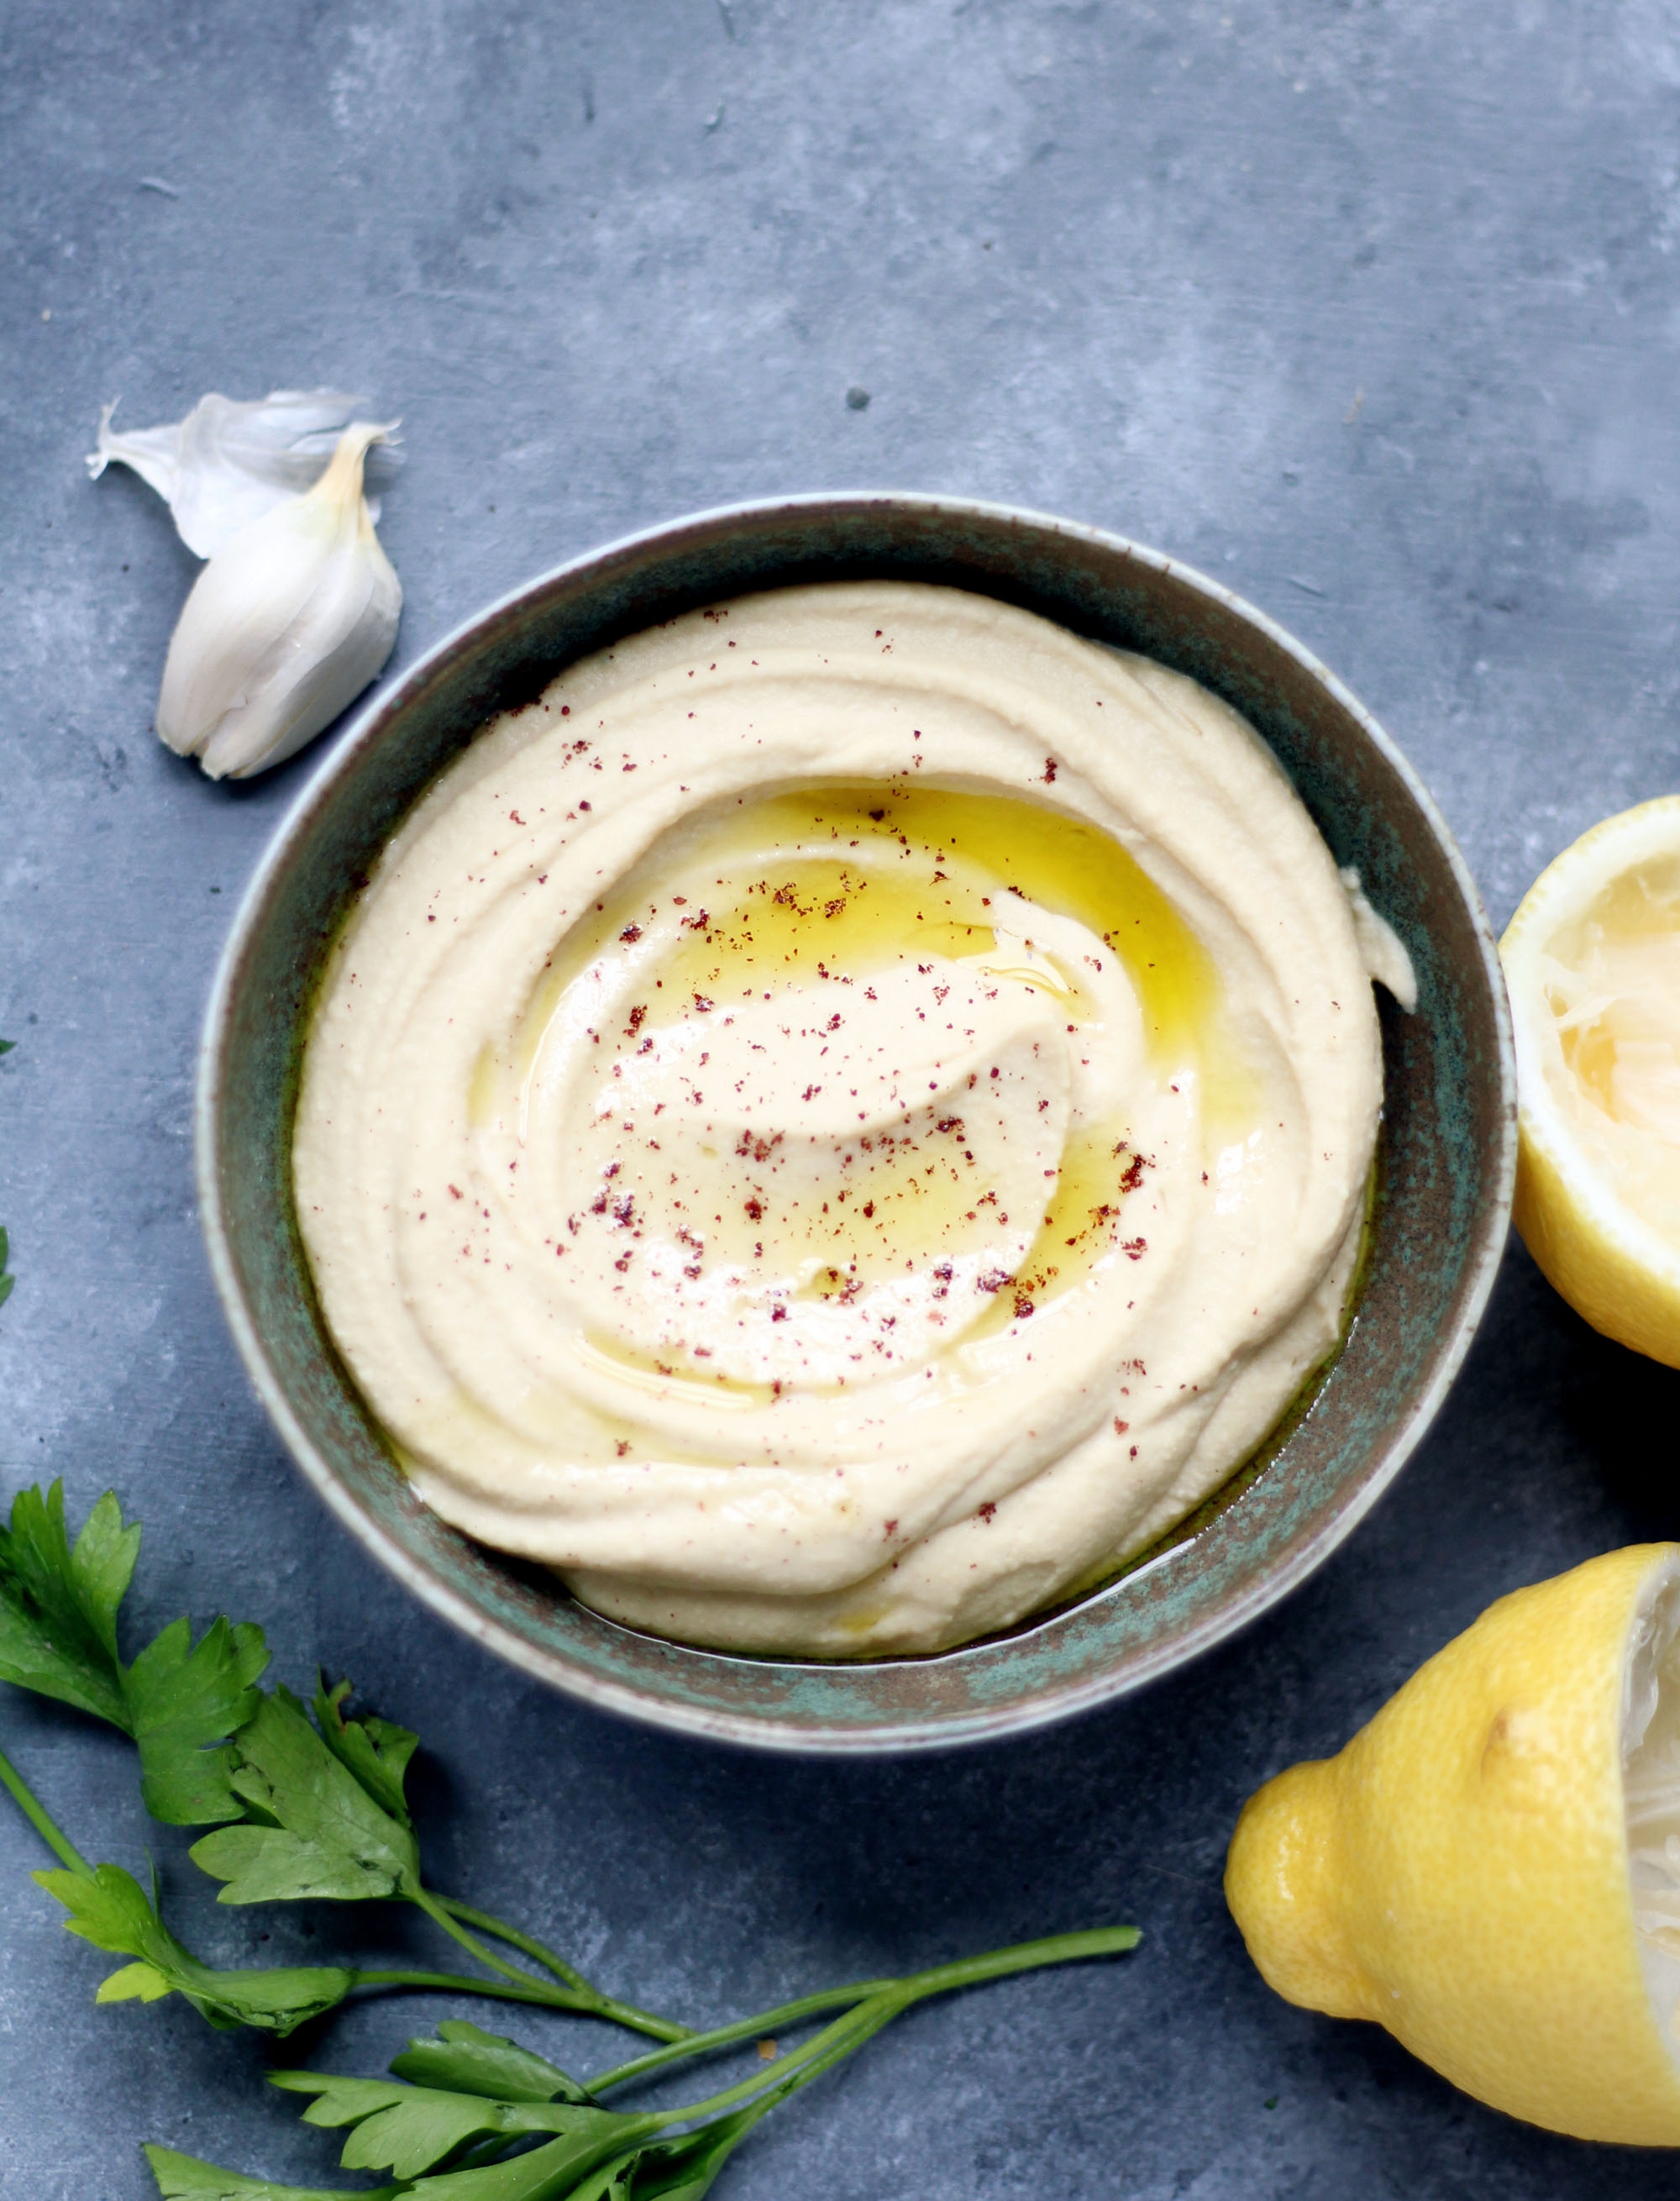 Tips and a recipe for making a smooth and creamy traditional hummus